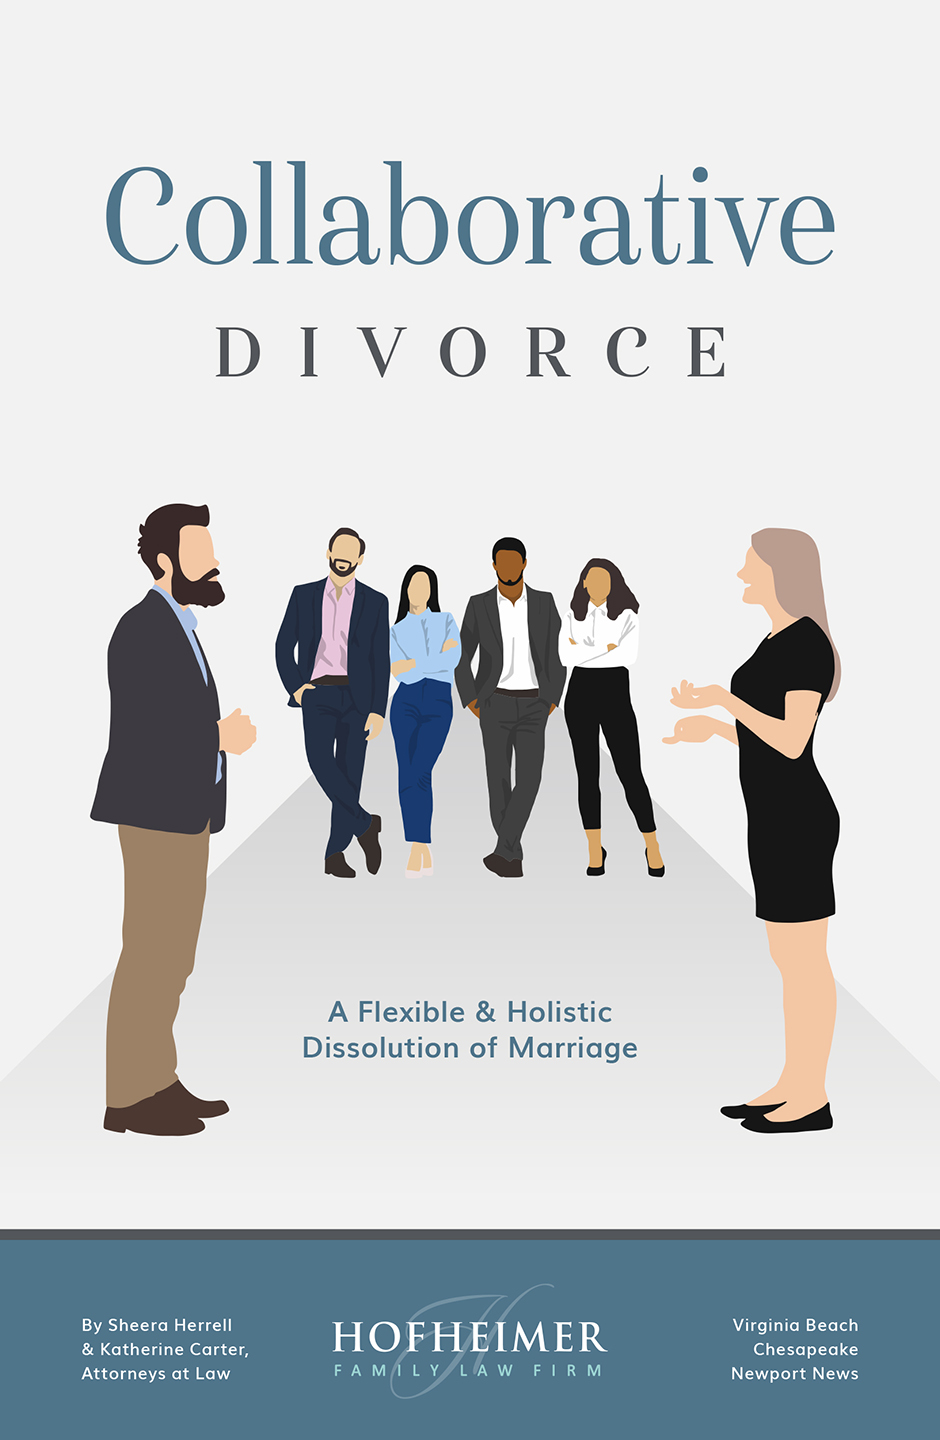 Collaborative Divorce a Flexible and Holistic Dissolution of Marriage